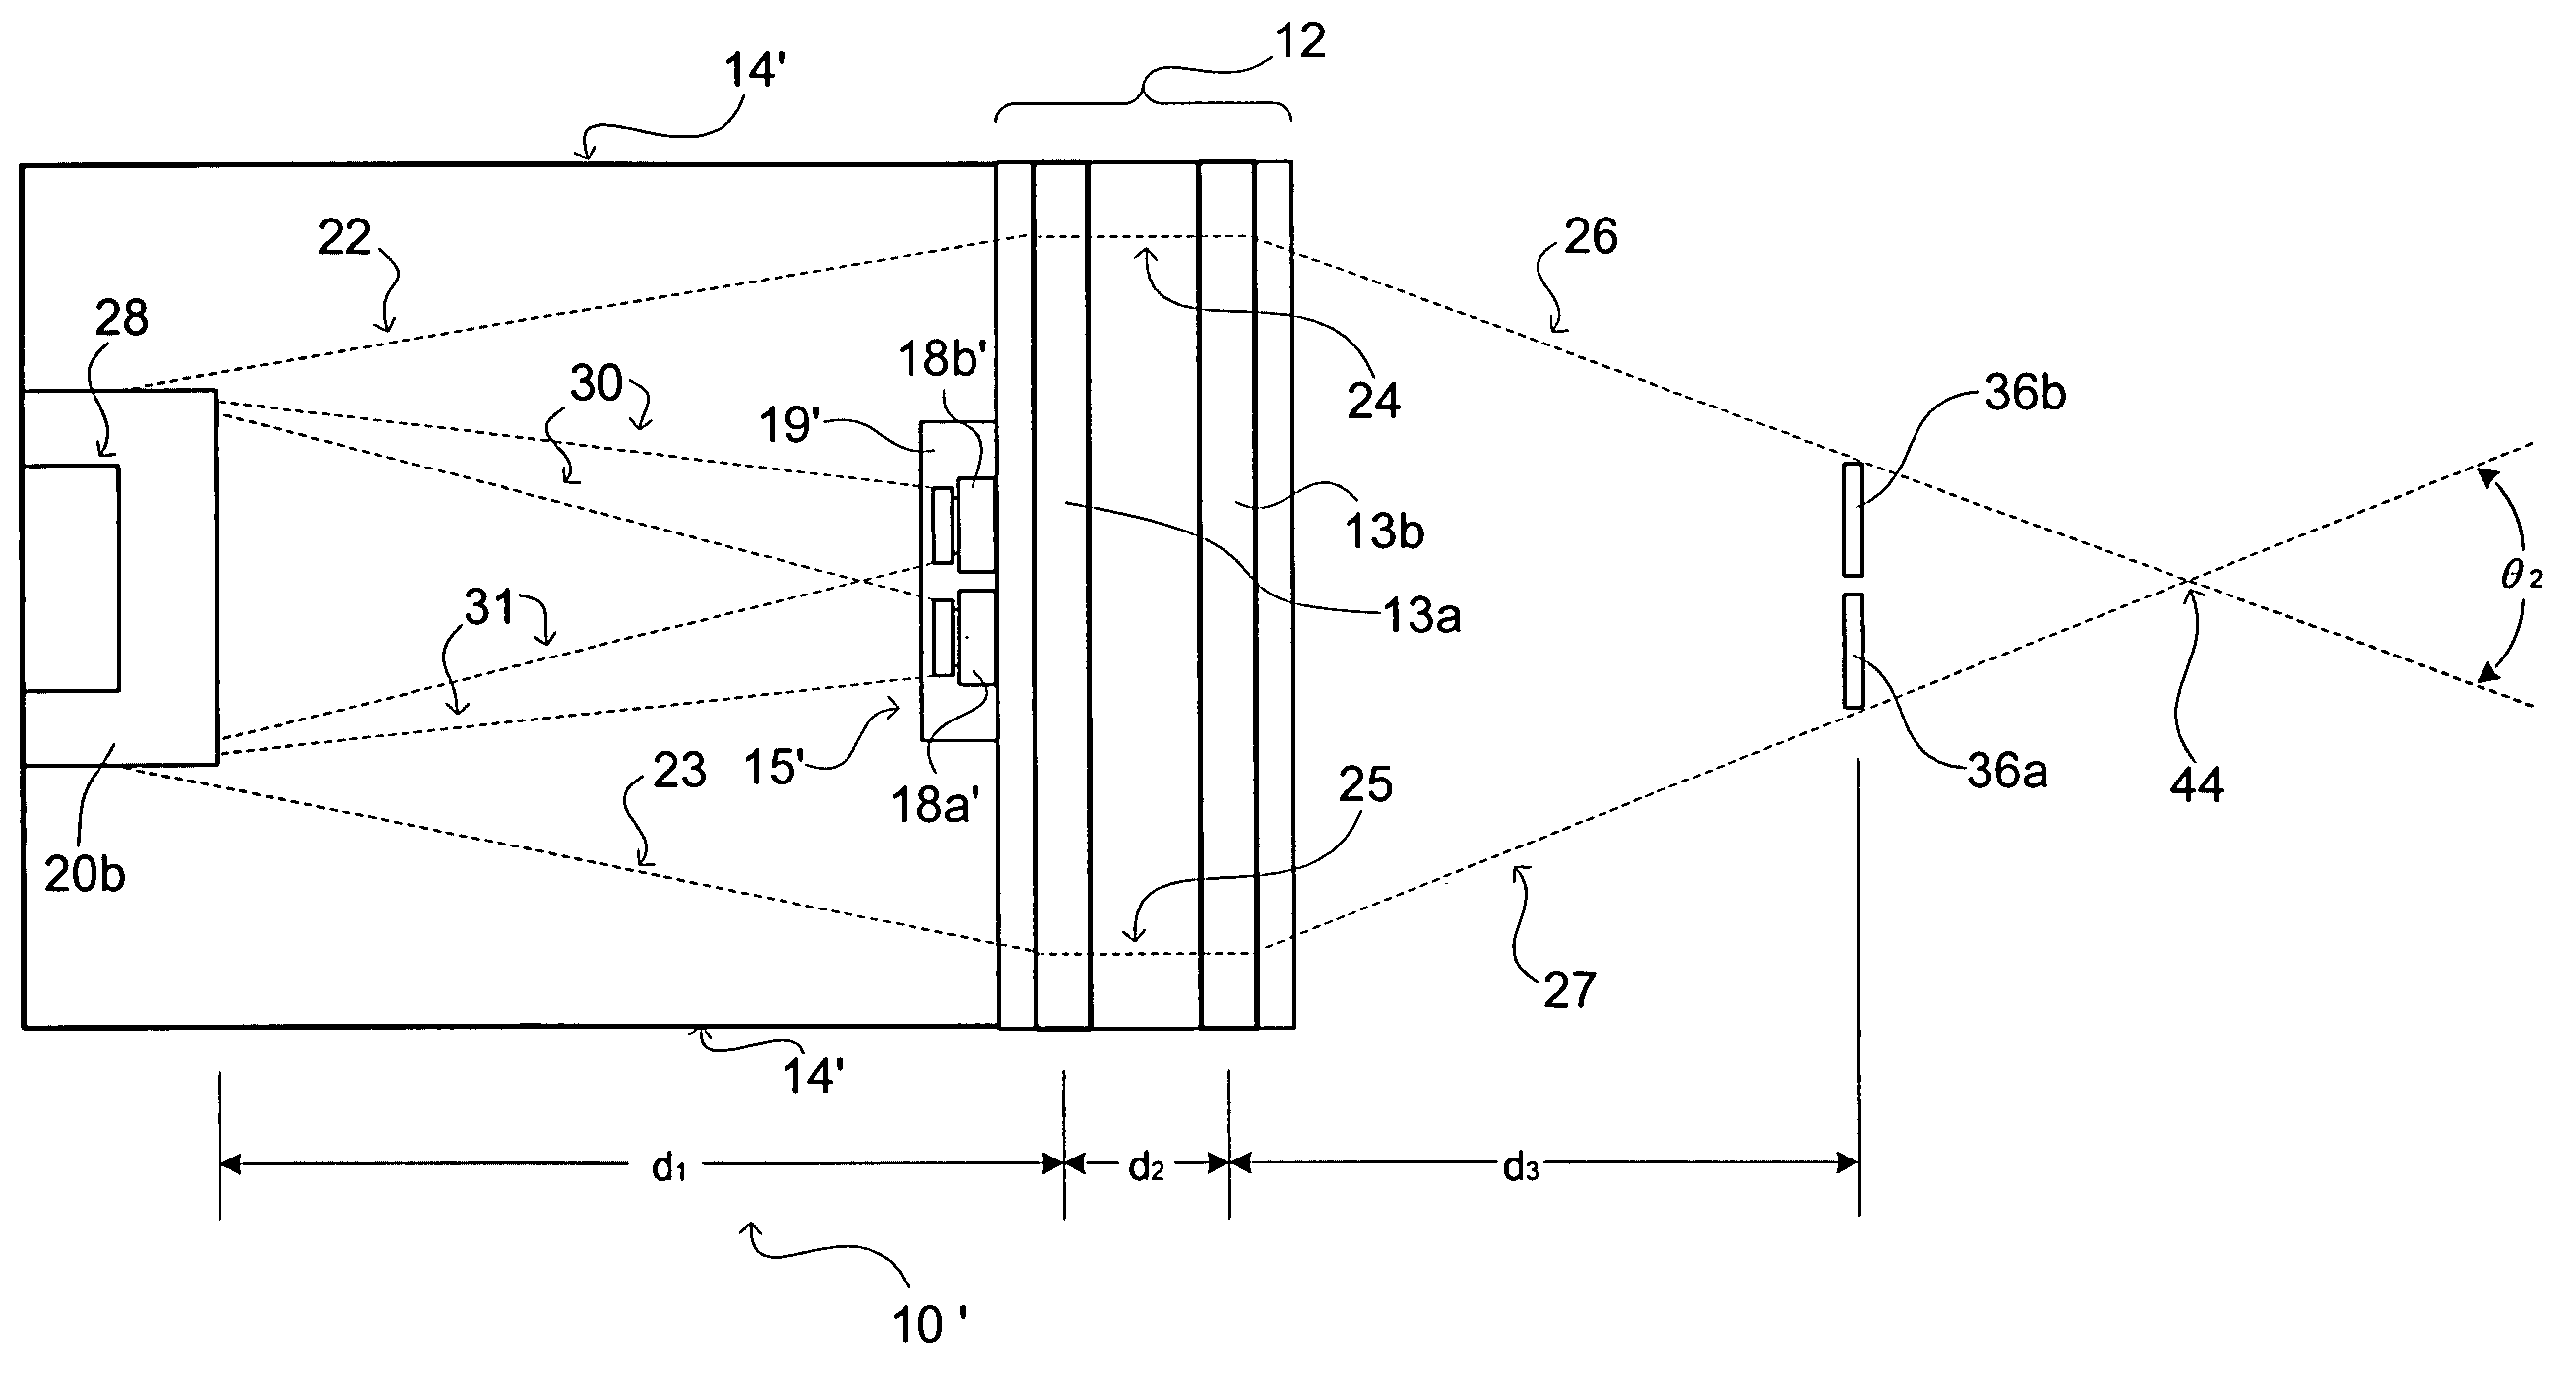 Three-dimensional free space image projection employing Fresnel lenses